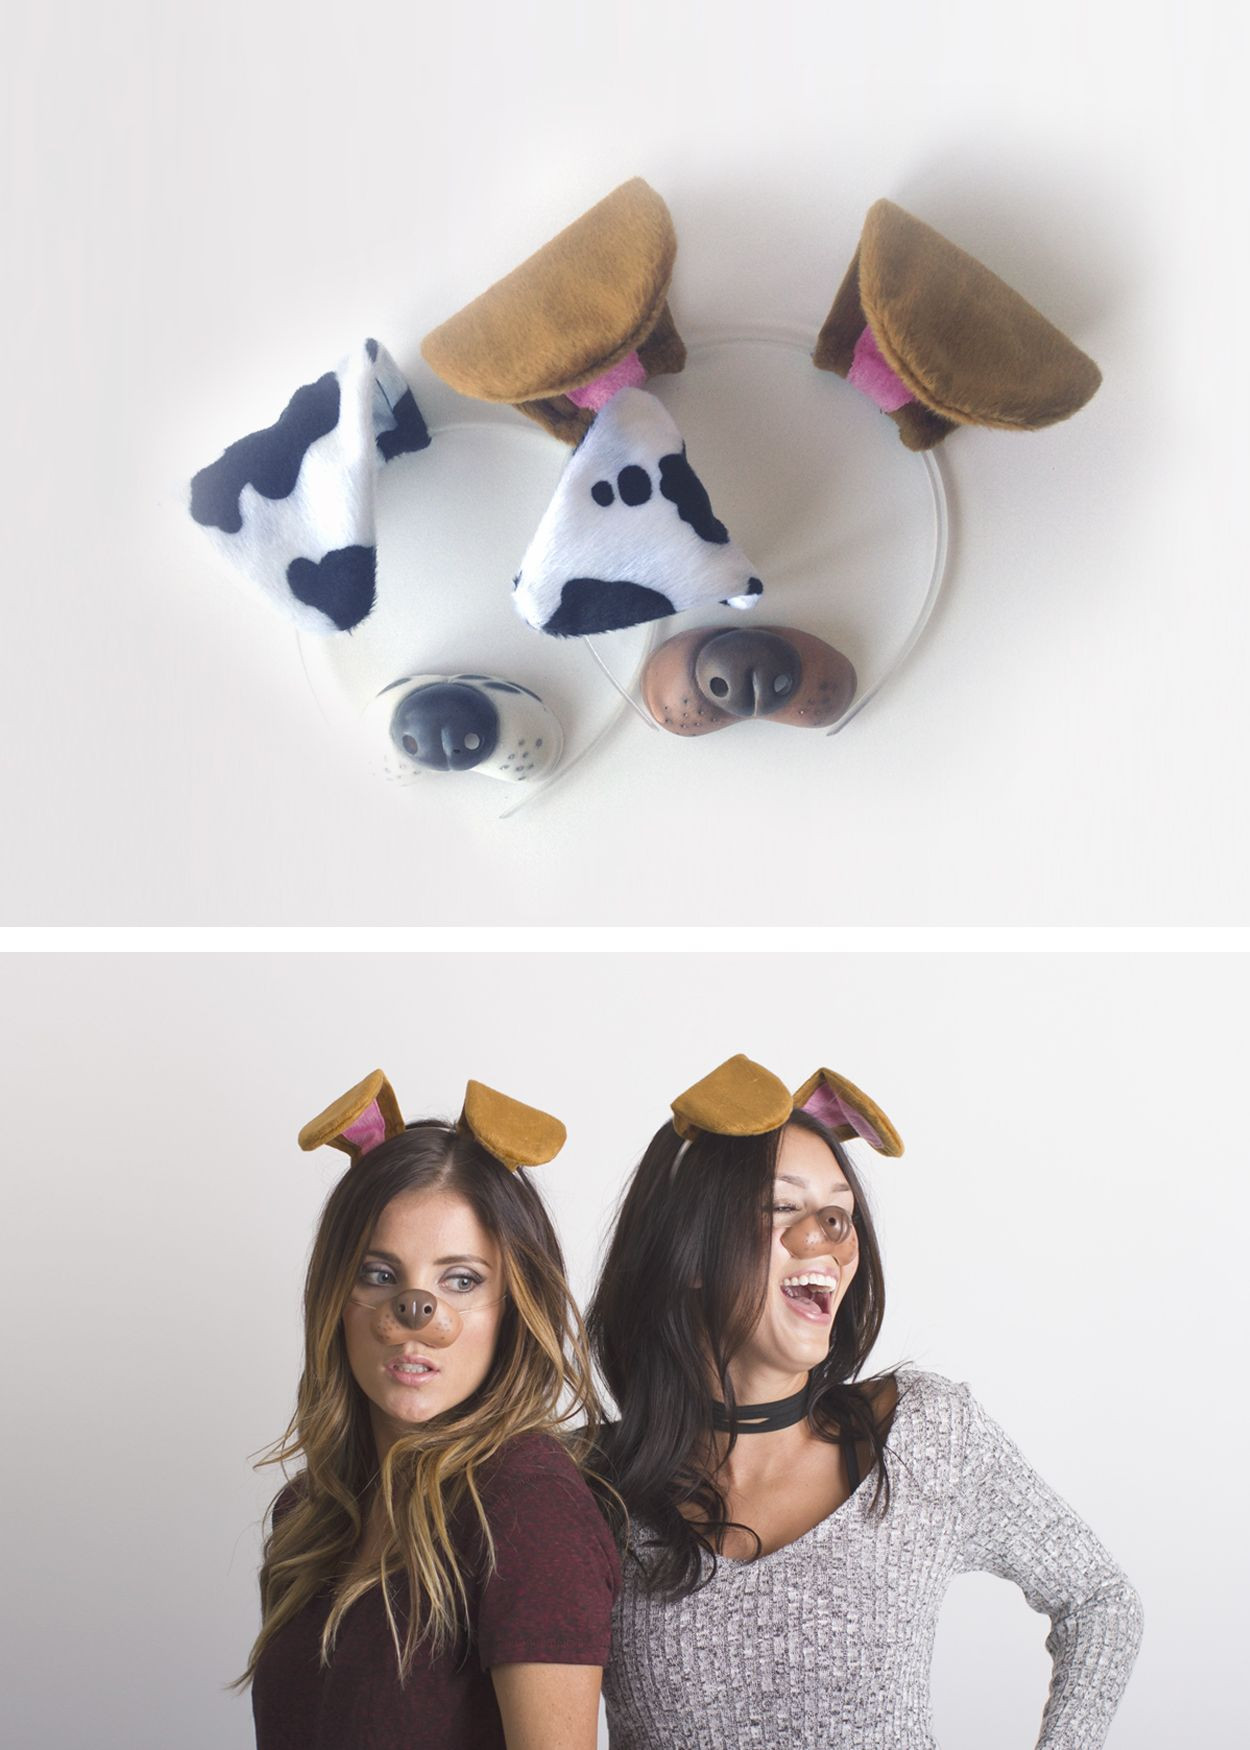 DIY Dog Filter Costume
 Pin by Arata on Cute